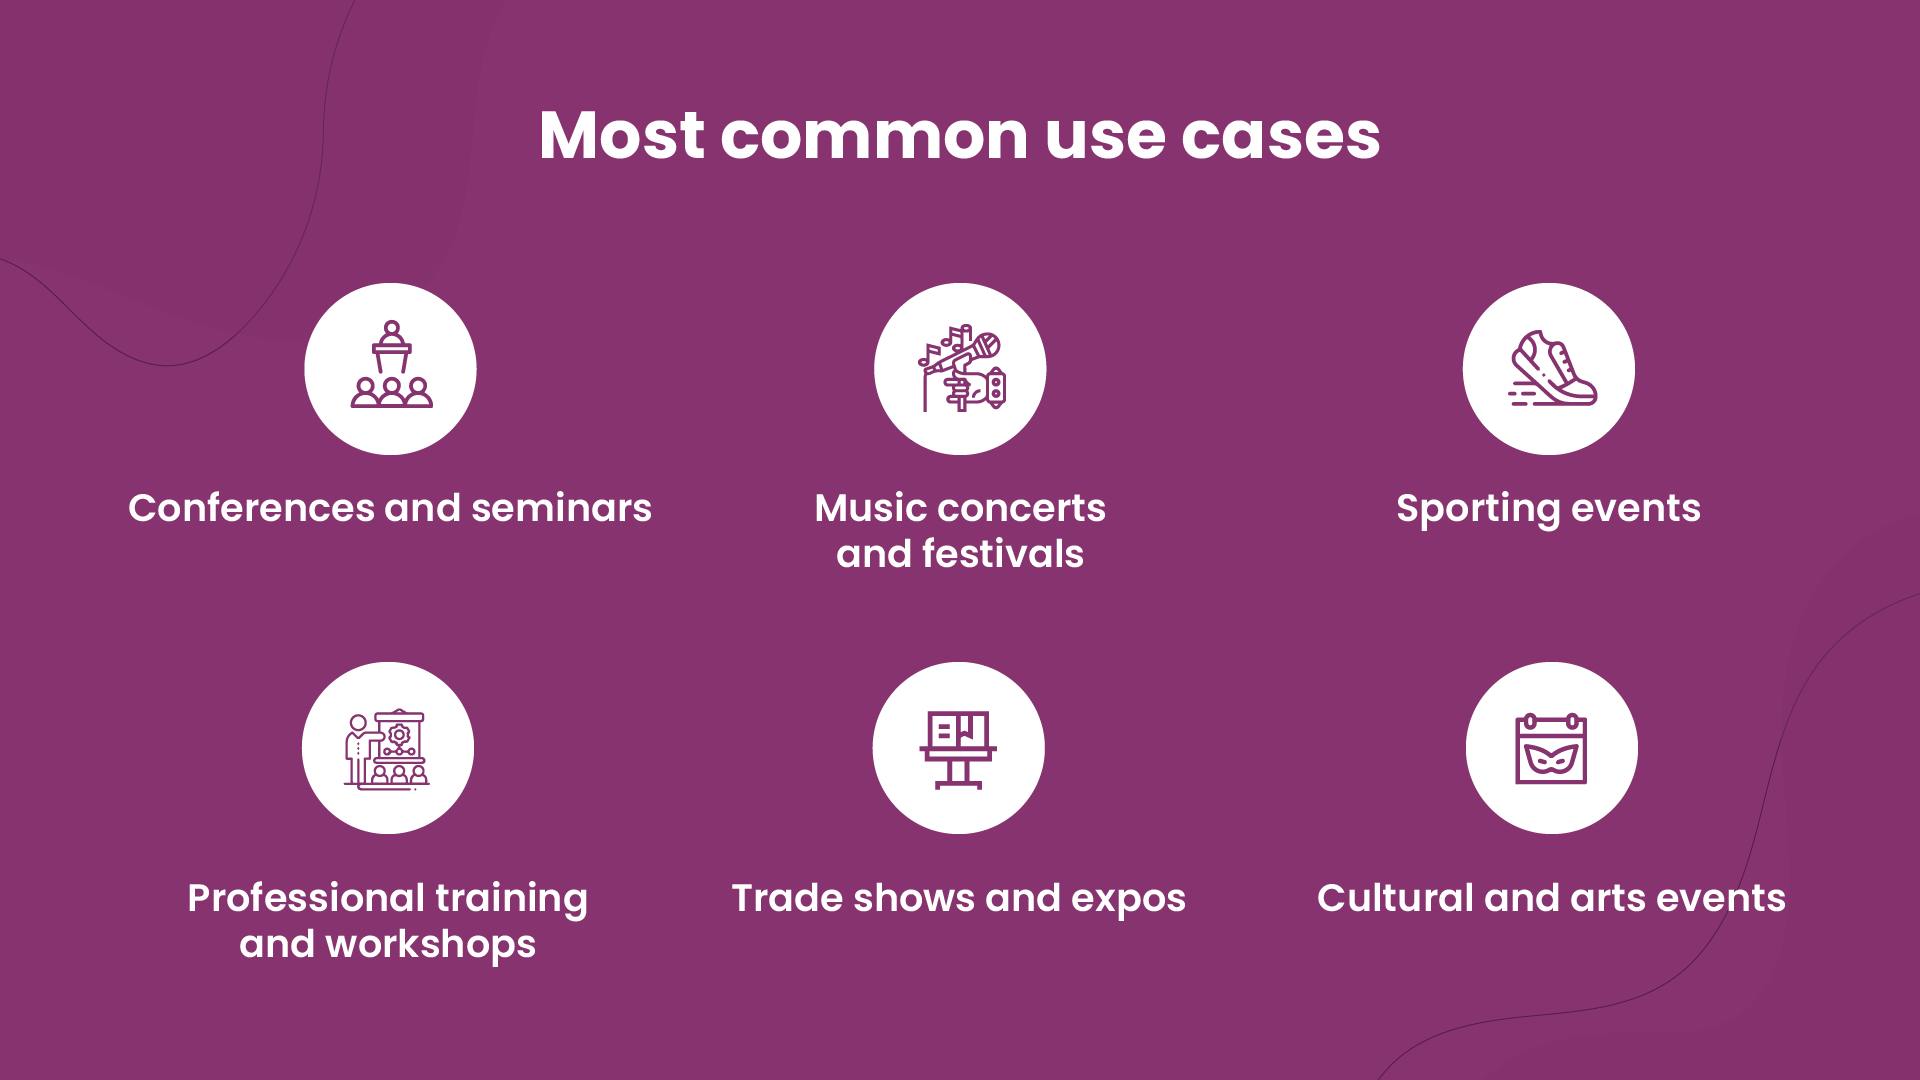 Commonly used industries and events